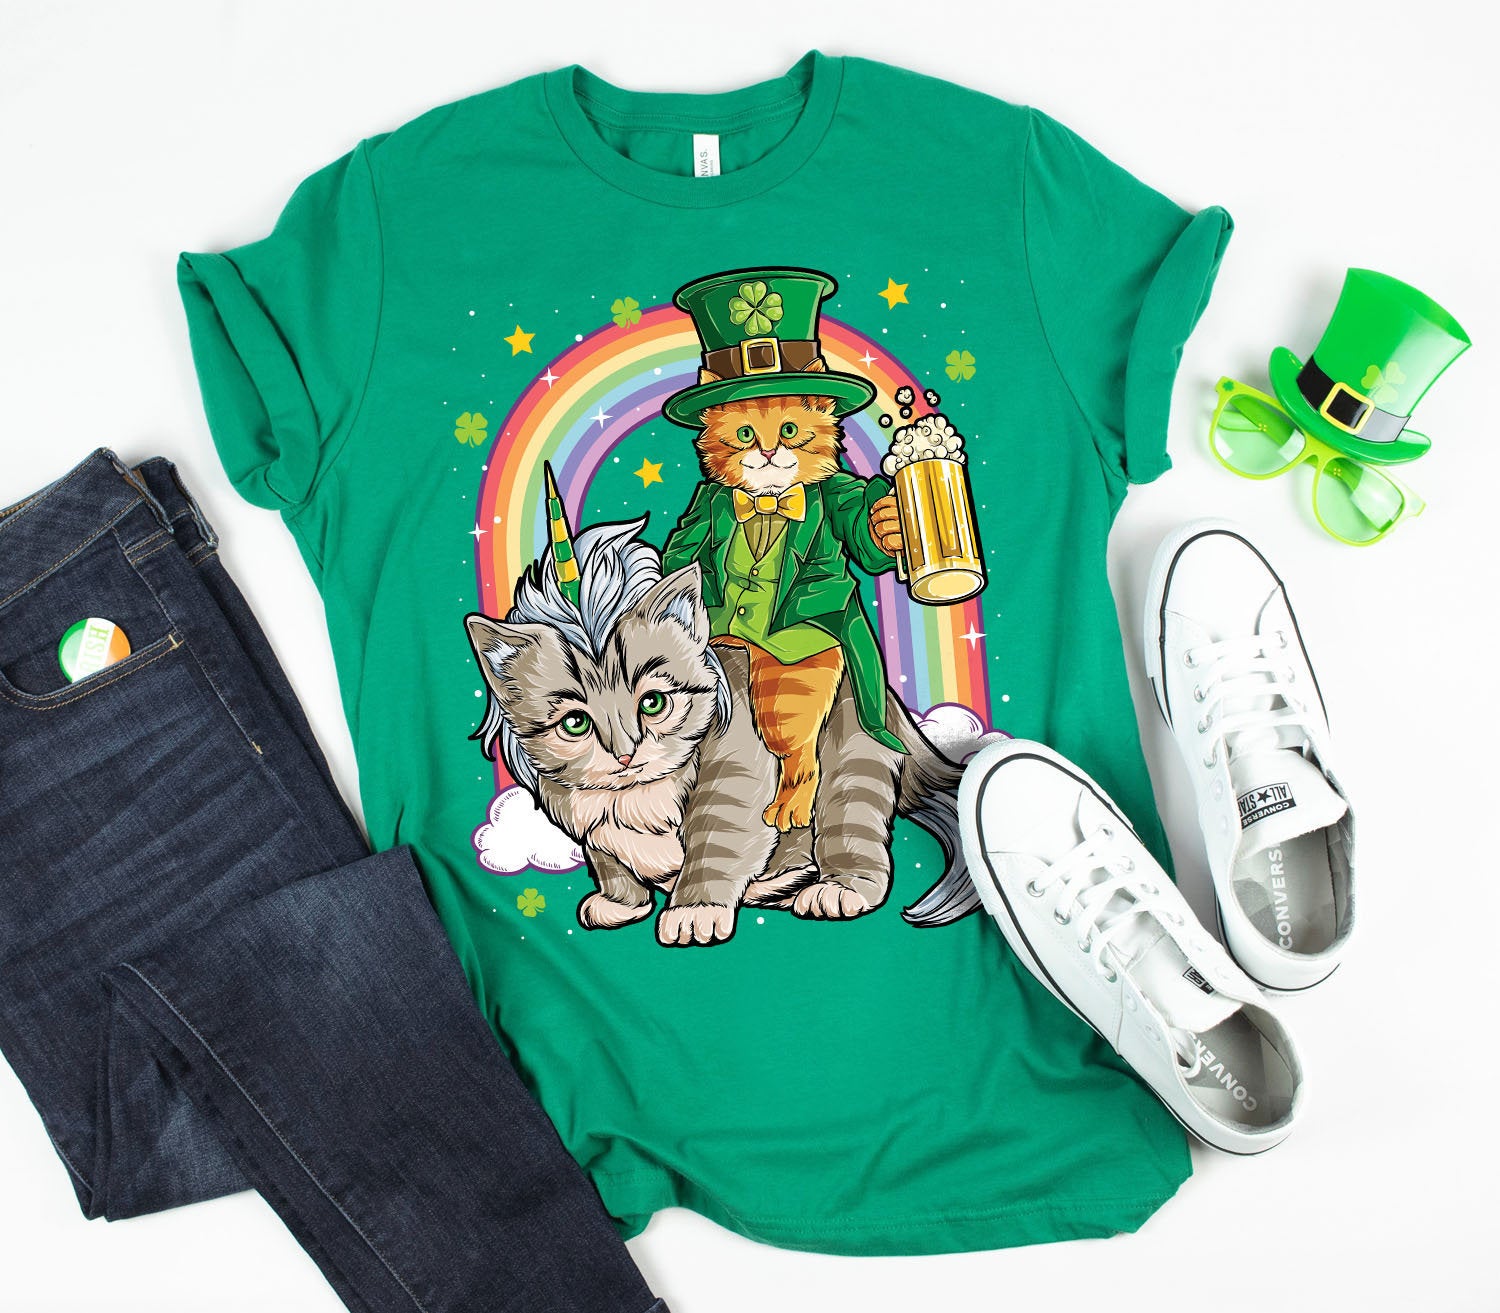 20 Extremely Cool St. Patrick’s Day Shirts